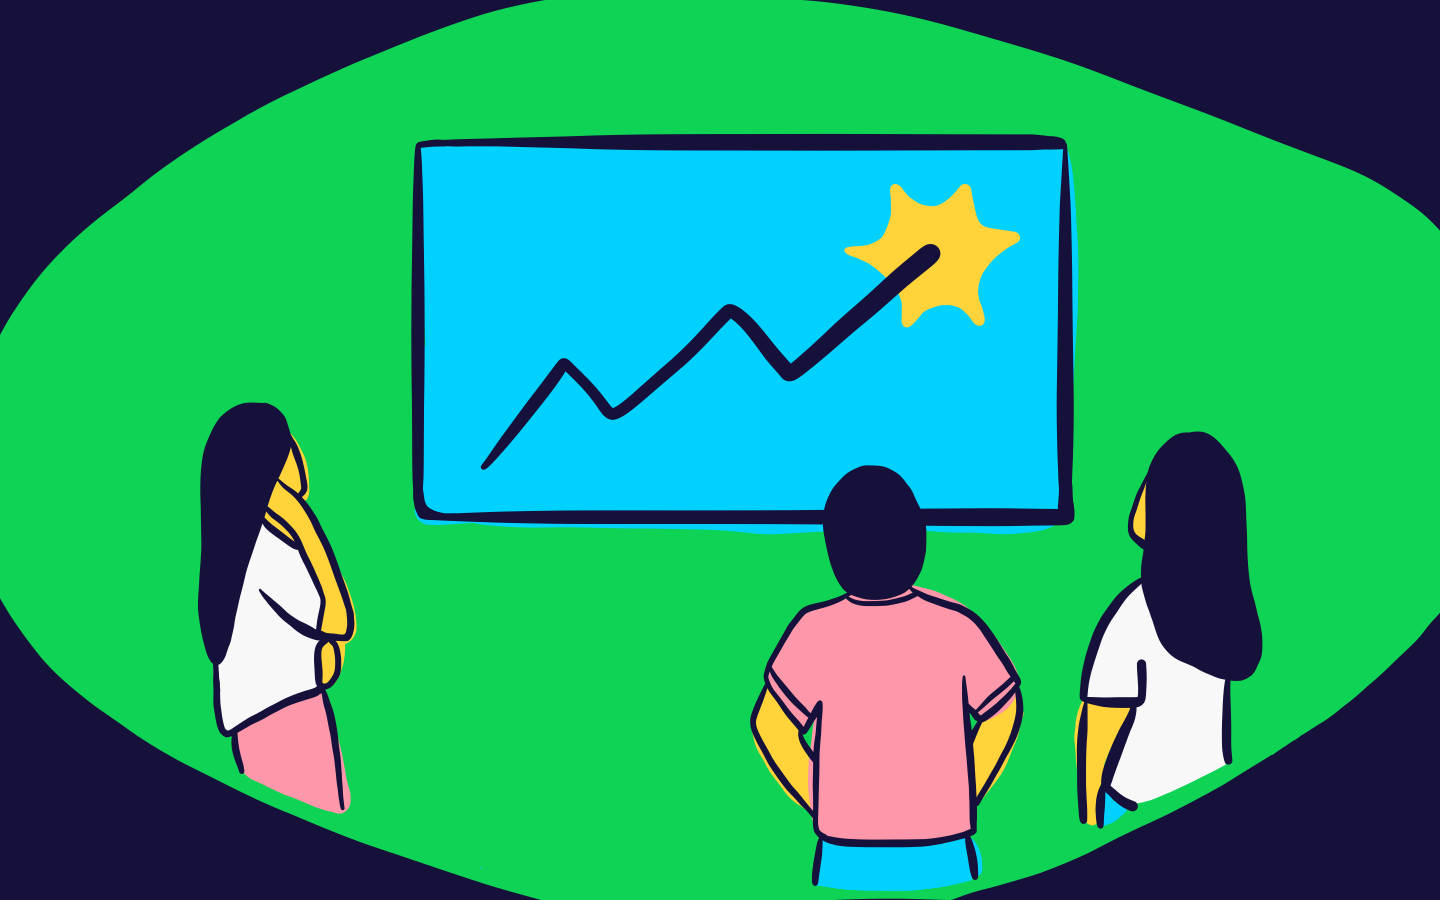 How TV dashboards can help your team achieve goals